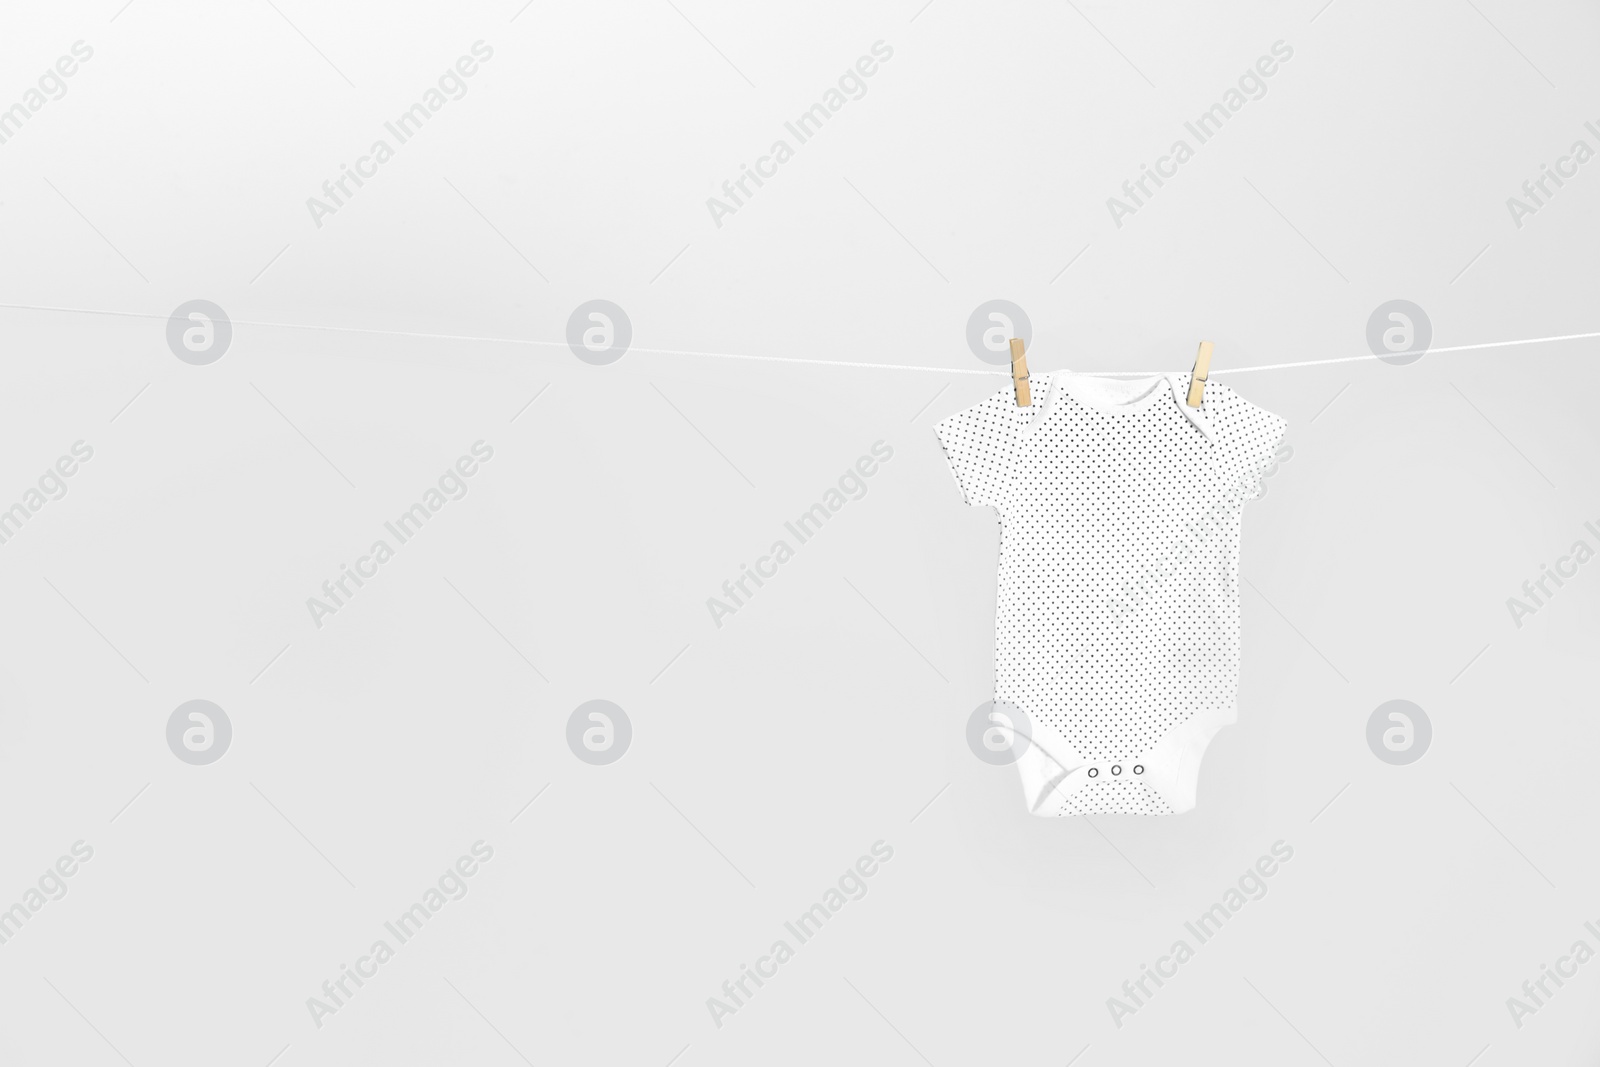 Photo of Cute baby onesie hanging on clothes line against light grey background, space for text. Laundry day